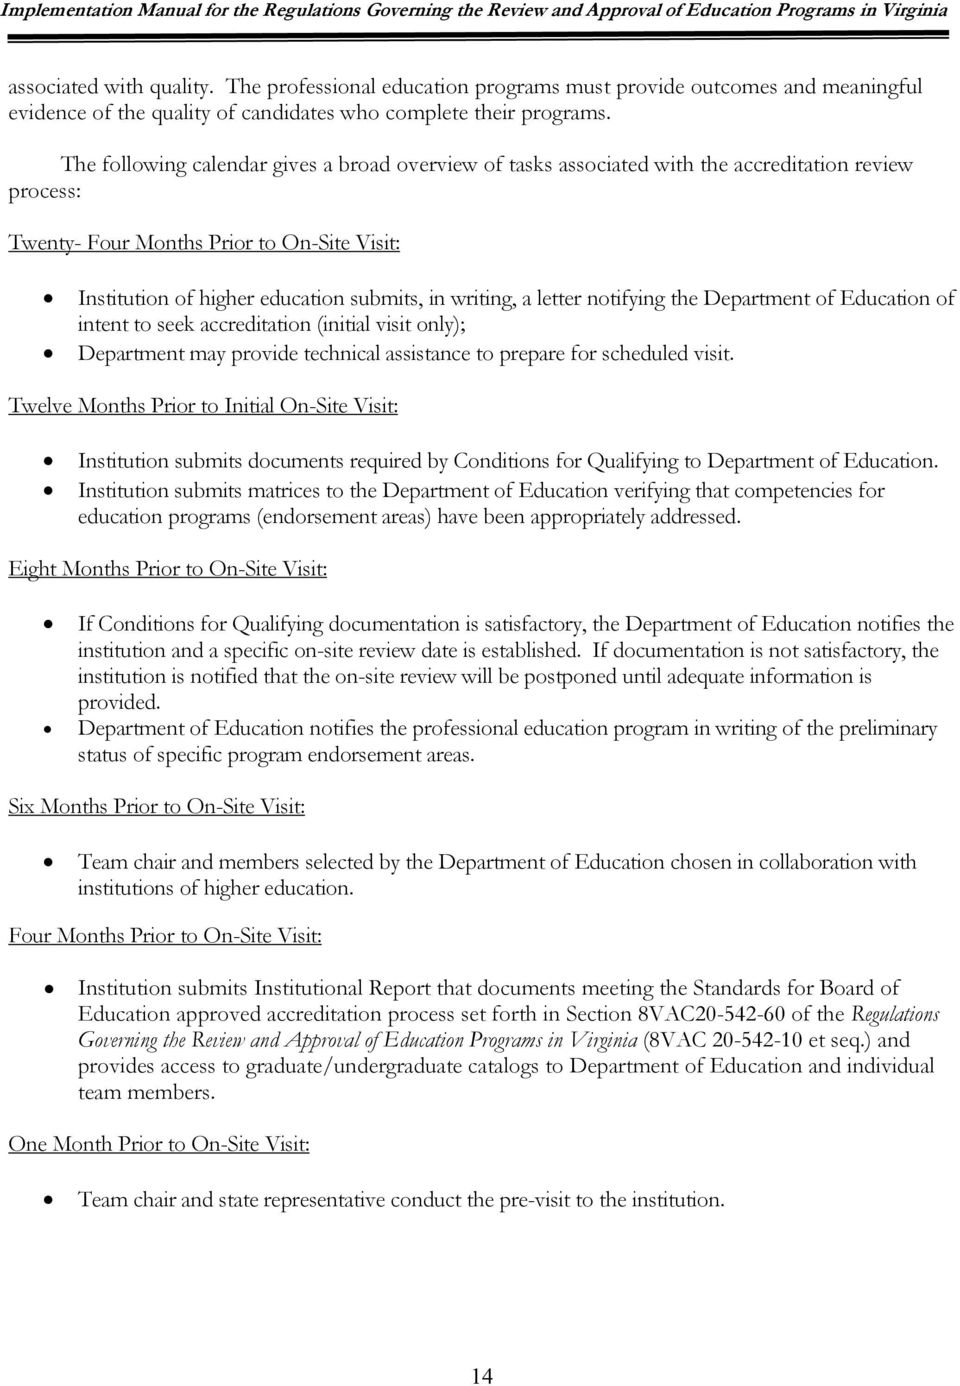 writing, a letter notifying the Department of Education of intent to seek accreditation (initial visit only); Department may provide technical assistance to prepare for scheduled visit.